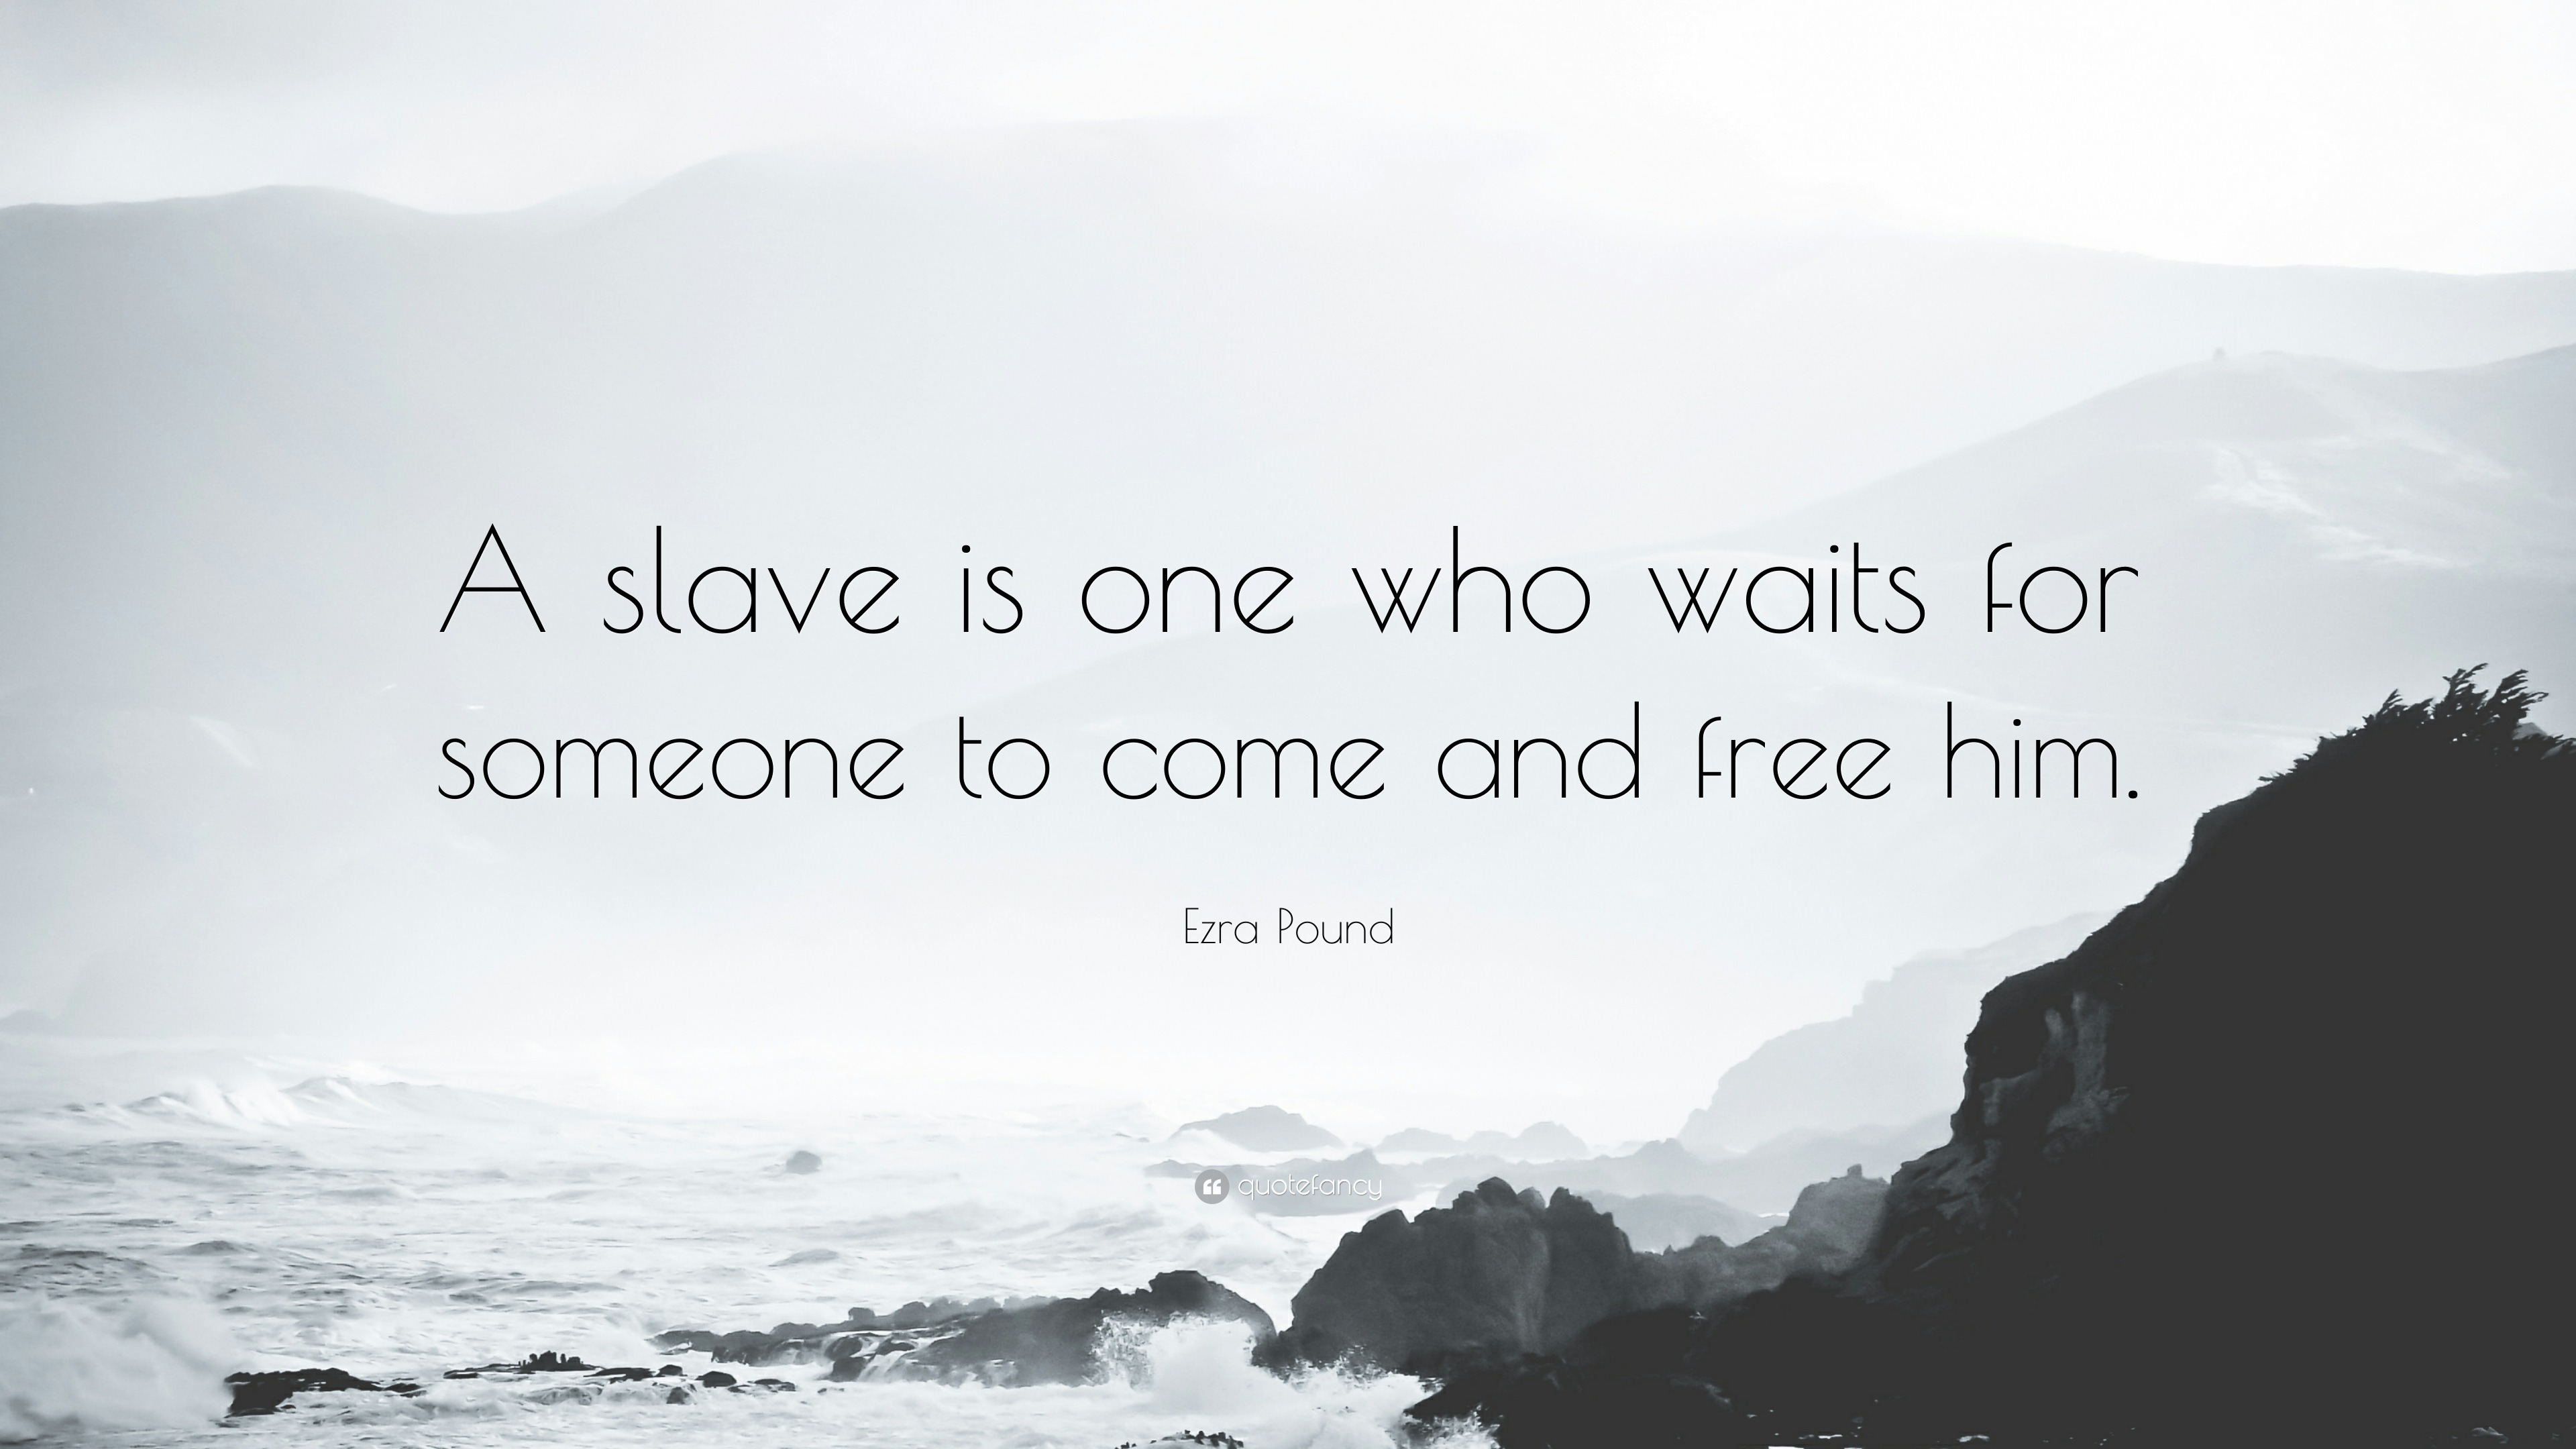 Ezra Pound Quote: “A slave is one who waits for someone to come and ...